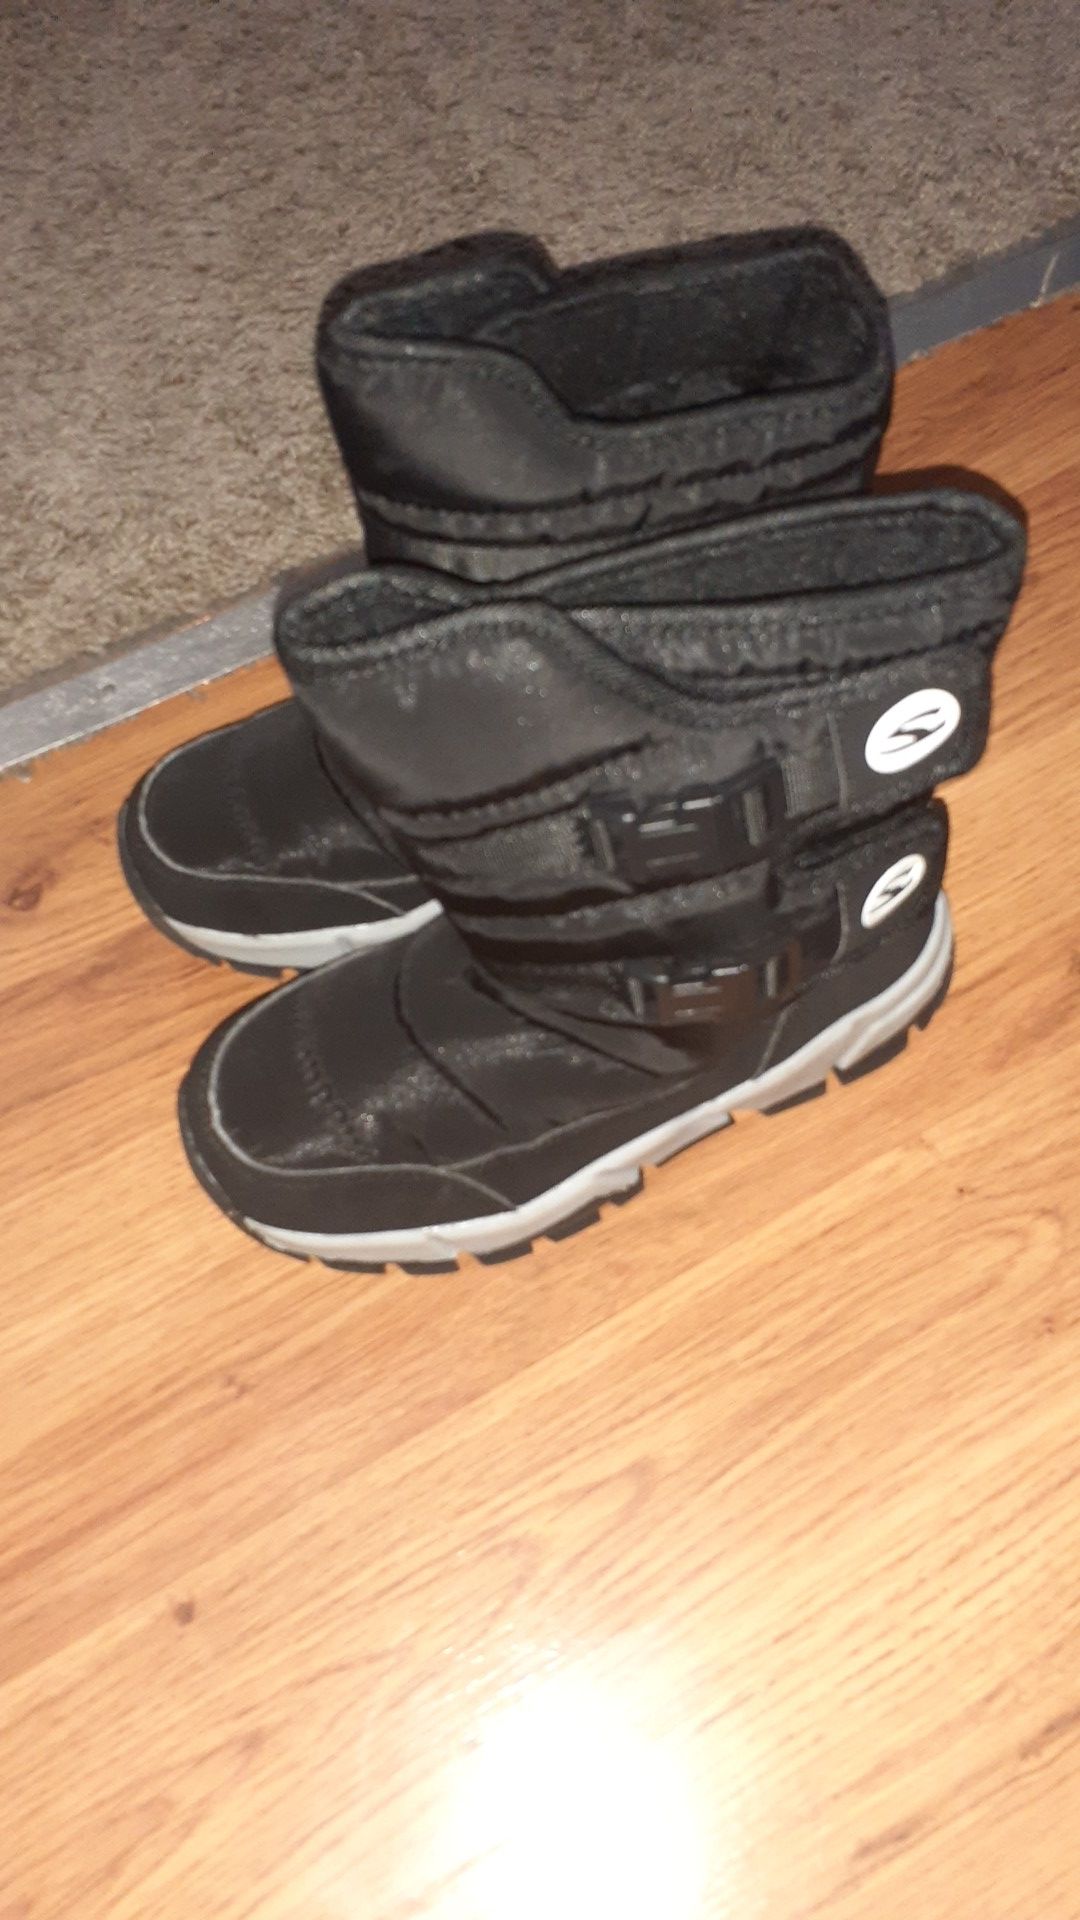 Size 2 kid Snow Boot, 1.5 Timberland